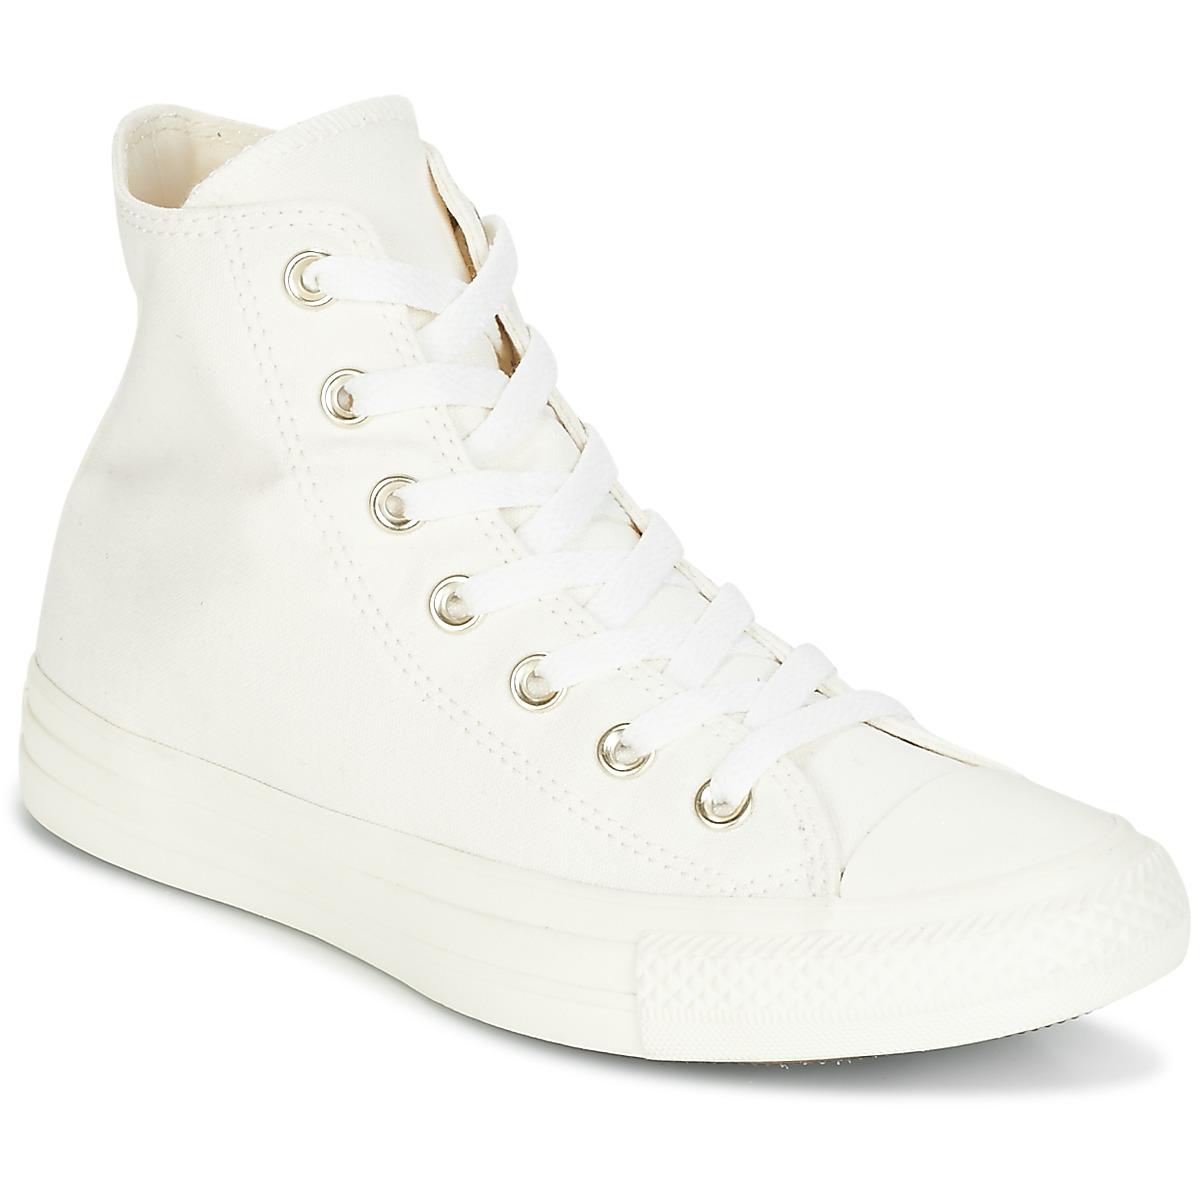 Converse Chuck Taylor All Star Hi Mono Glam Canvas Color Shoes (high-top  Trainers) in Beige (Natural) - Save 13% - Lyst